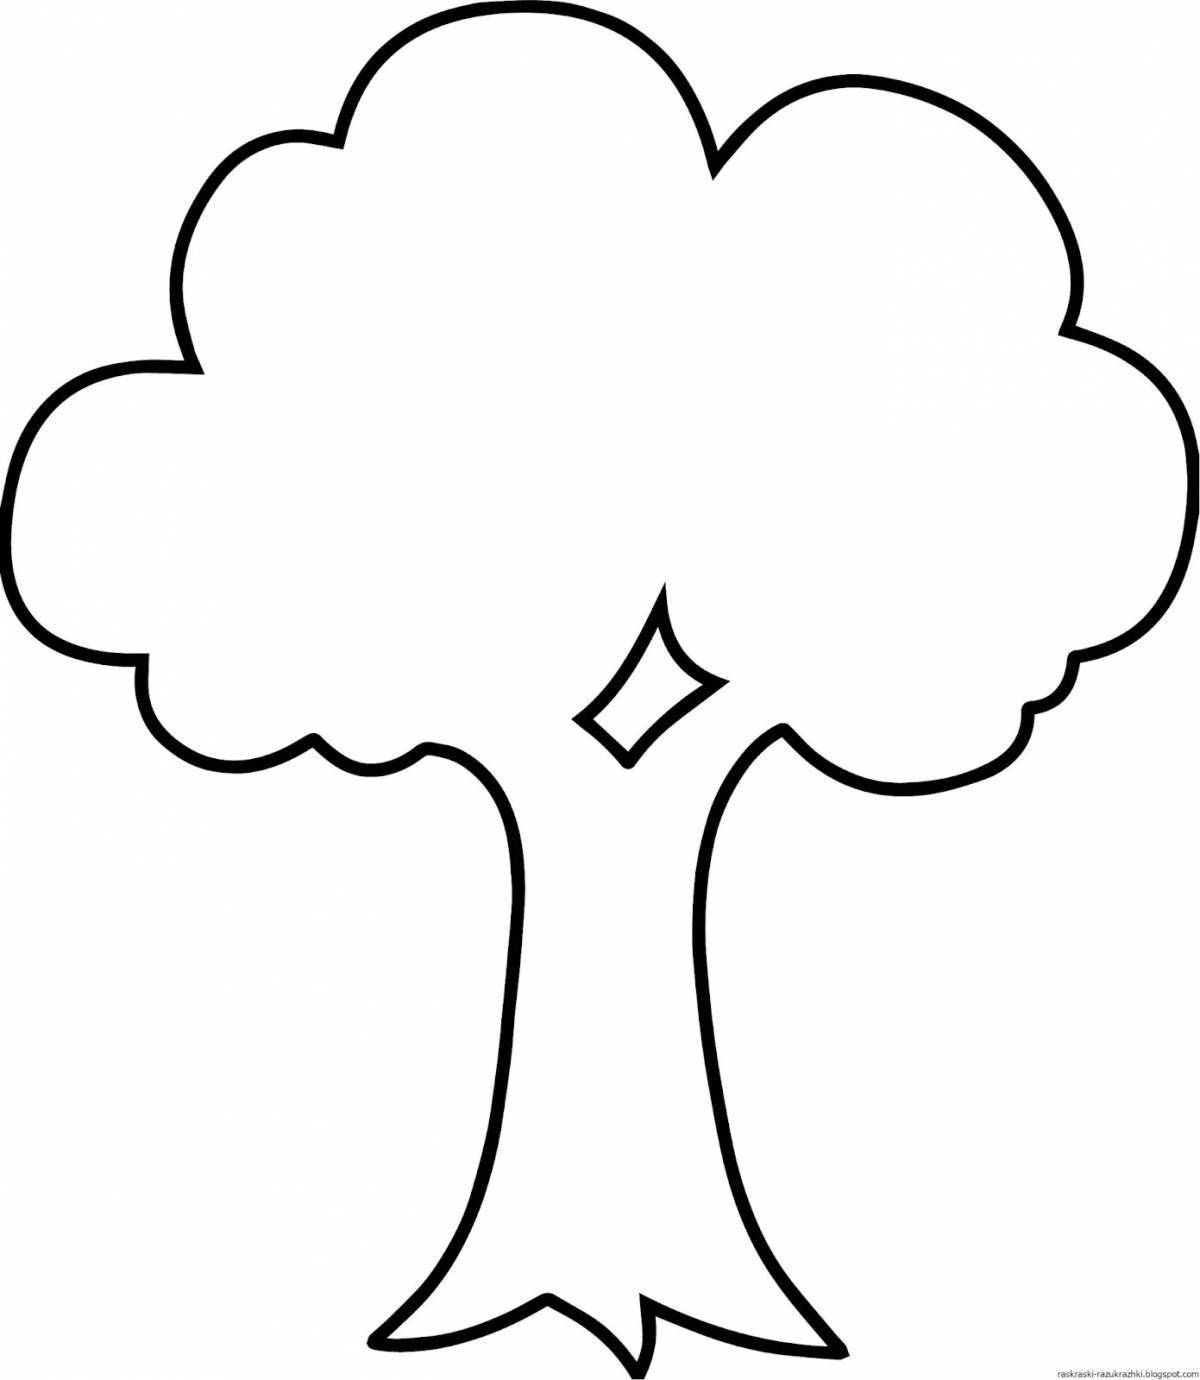 Coloring page of a spectacular tree silhouette